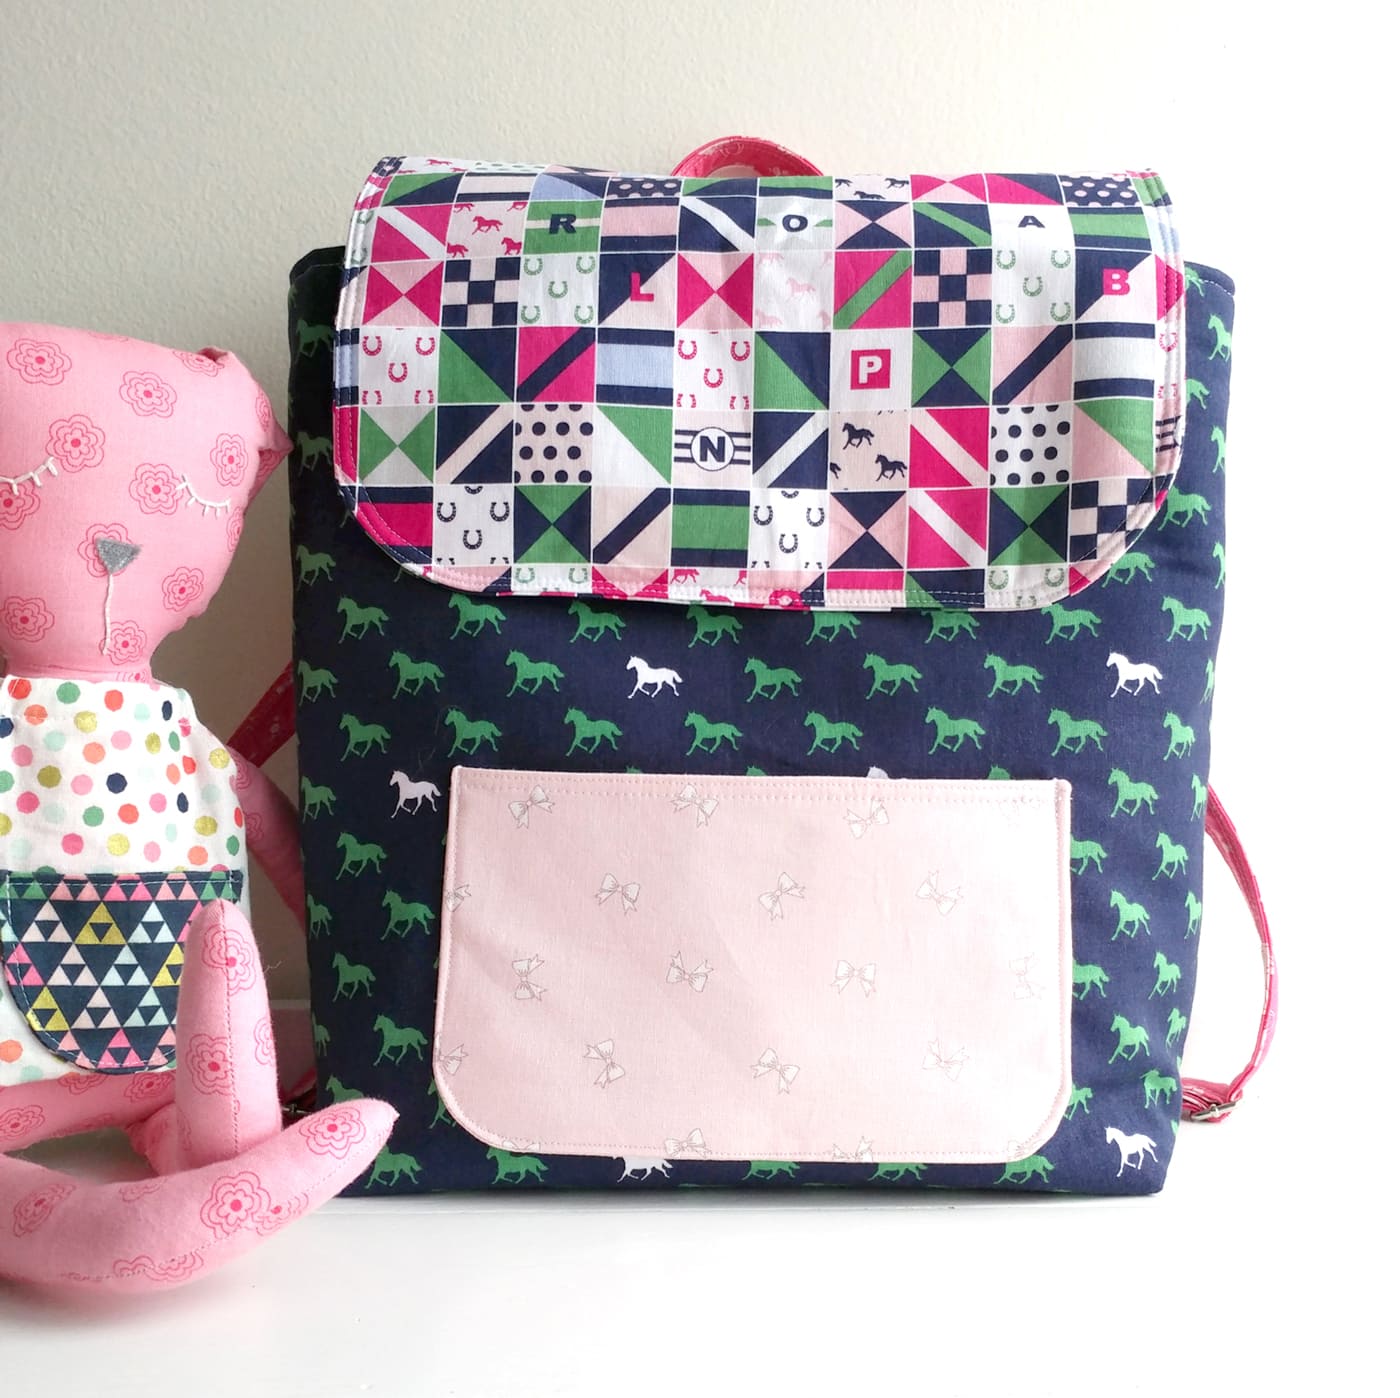 How to Make a Mini Backpack with Our Free Pattern